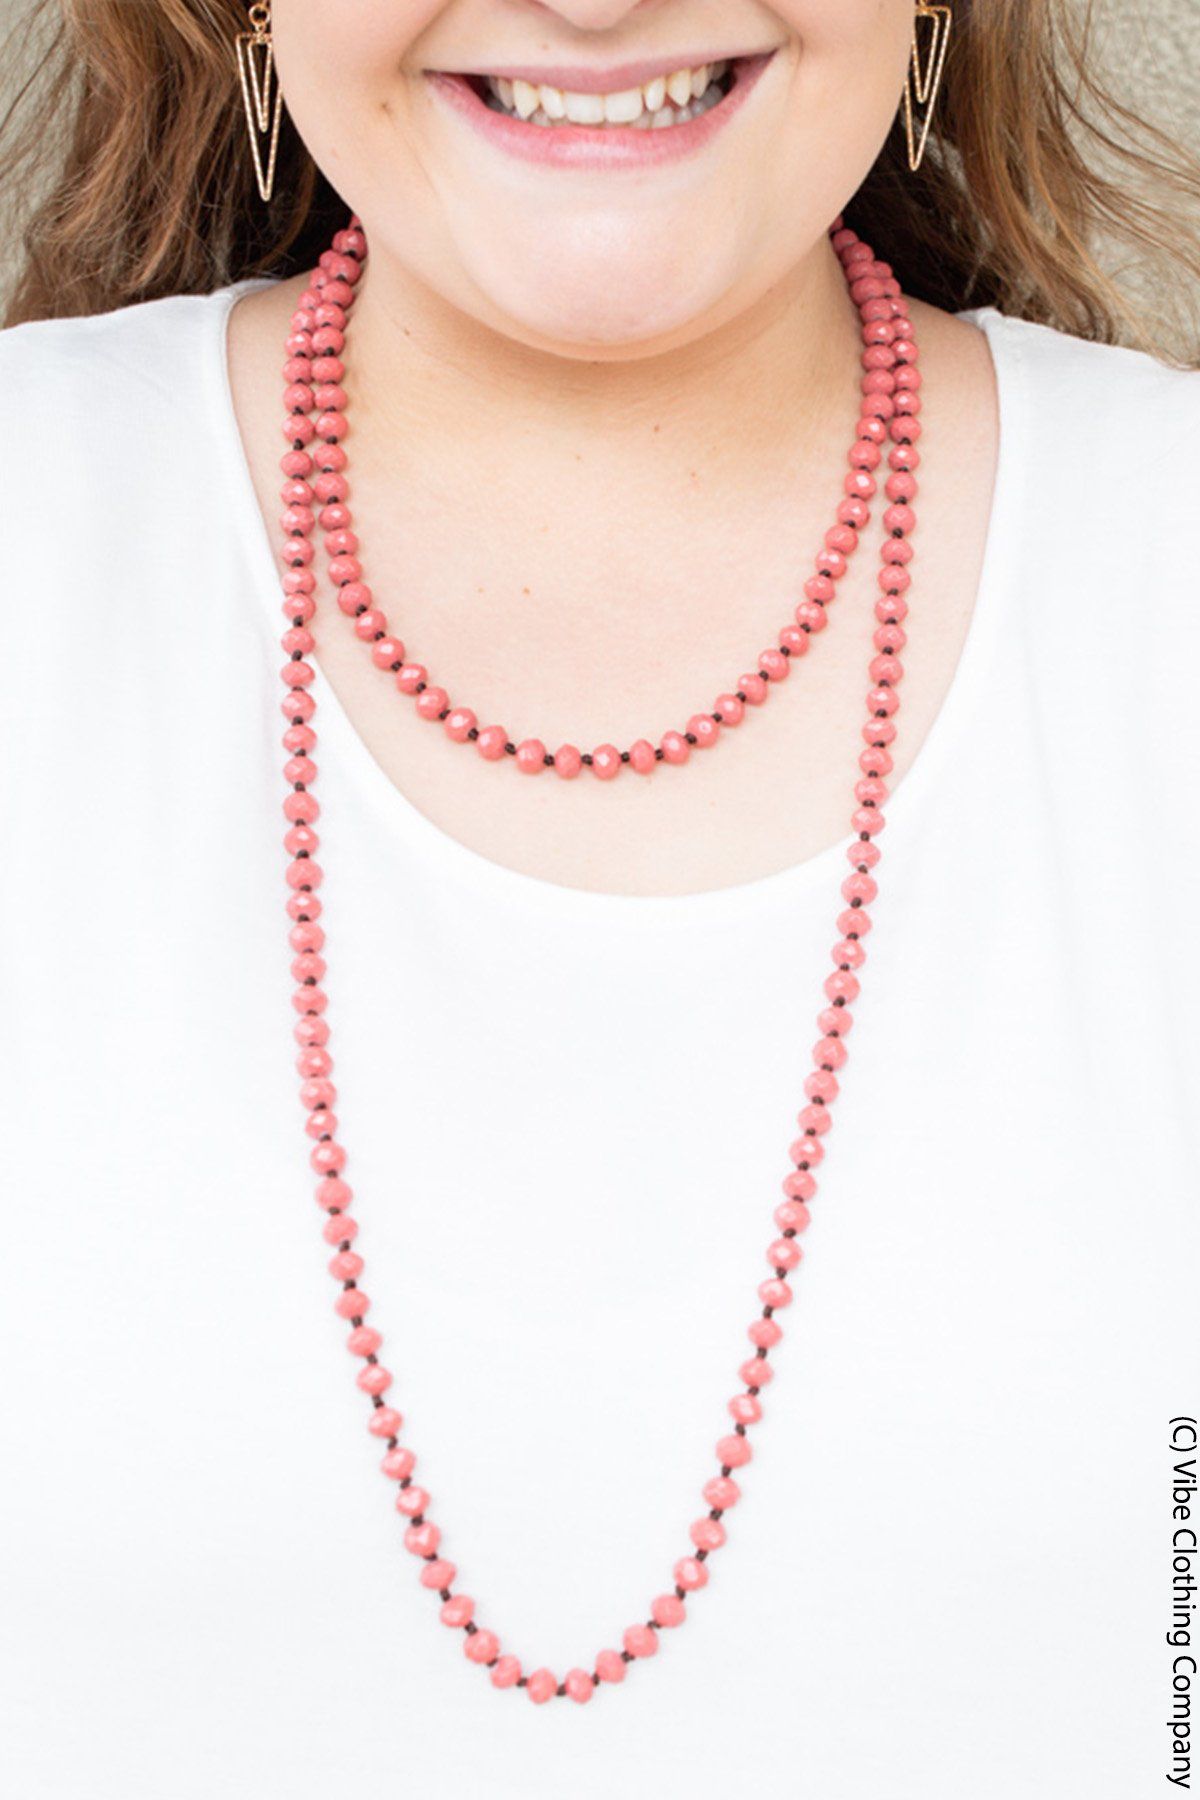 Wrap Necklaces 60" - All Colors jewelry ViVi Liam Jewelry Coral 